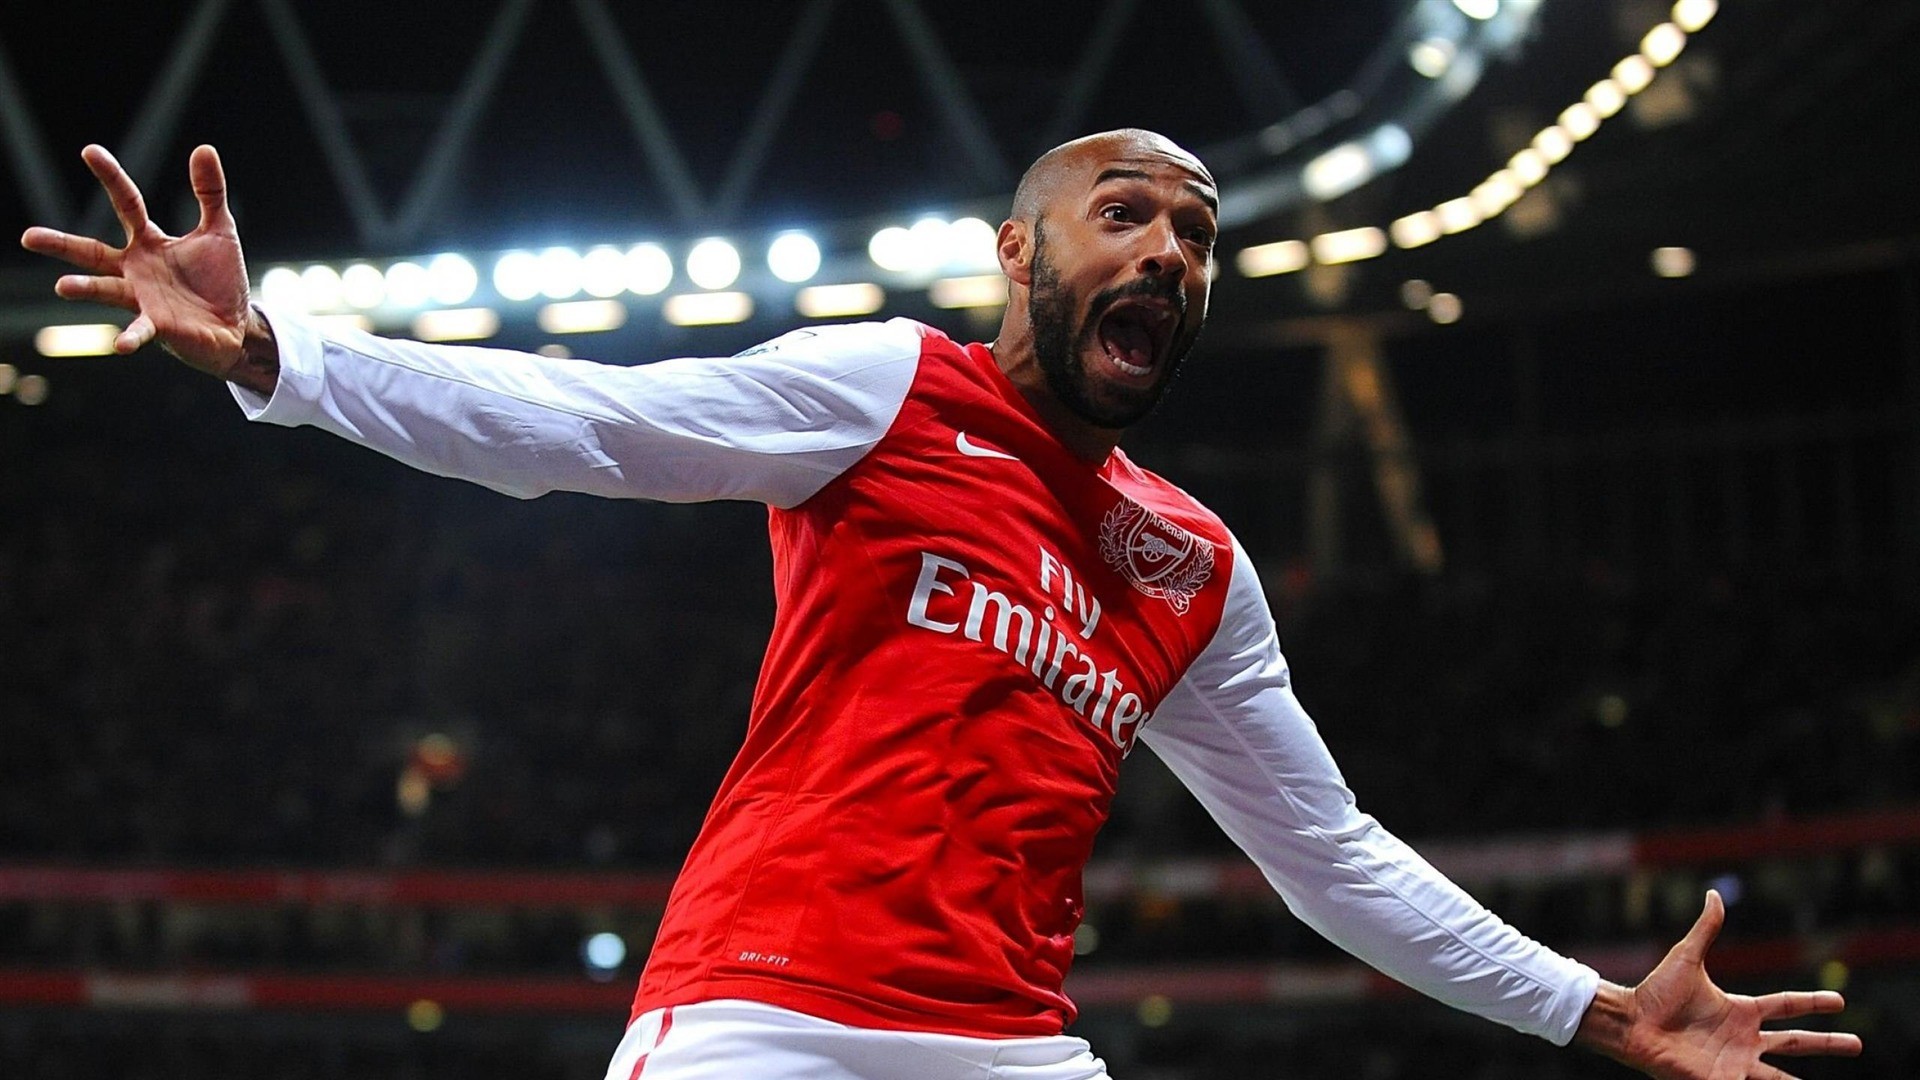 Thierry Henry Wallpaper HD